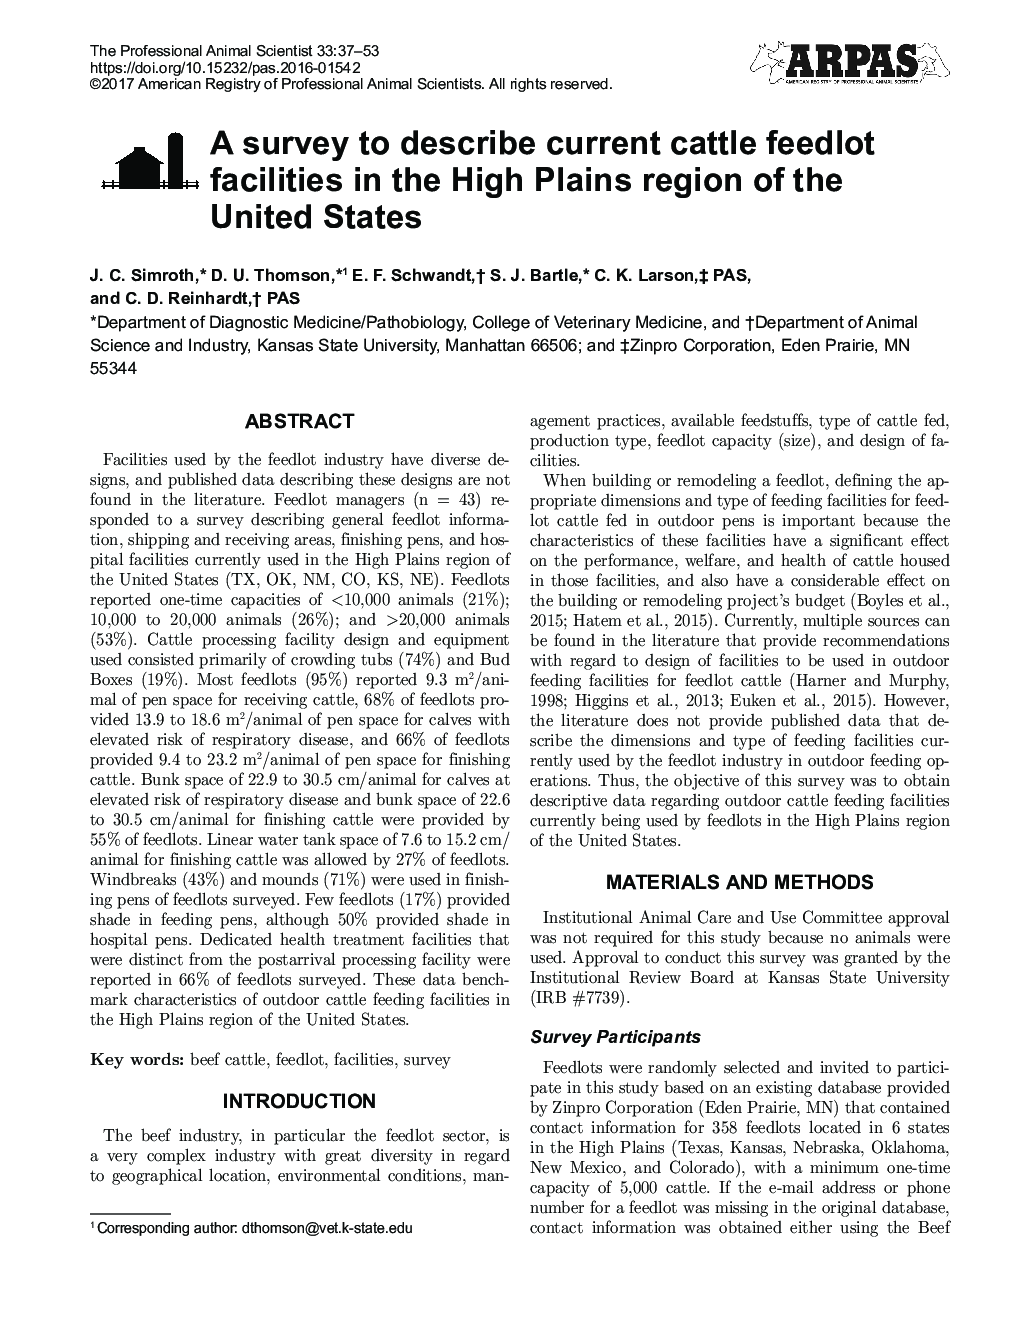 A survey to describe current cattle feedlot facilities in the High Plains region of the United States